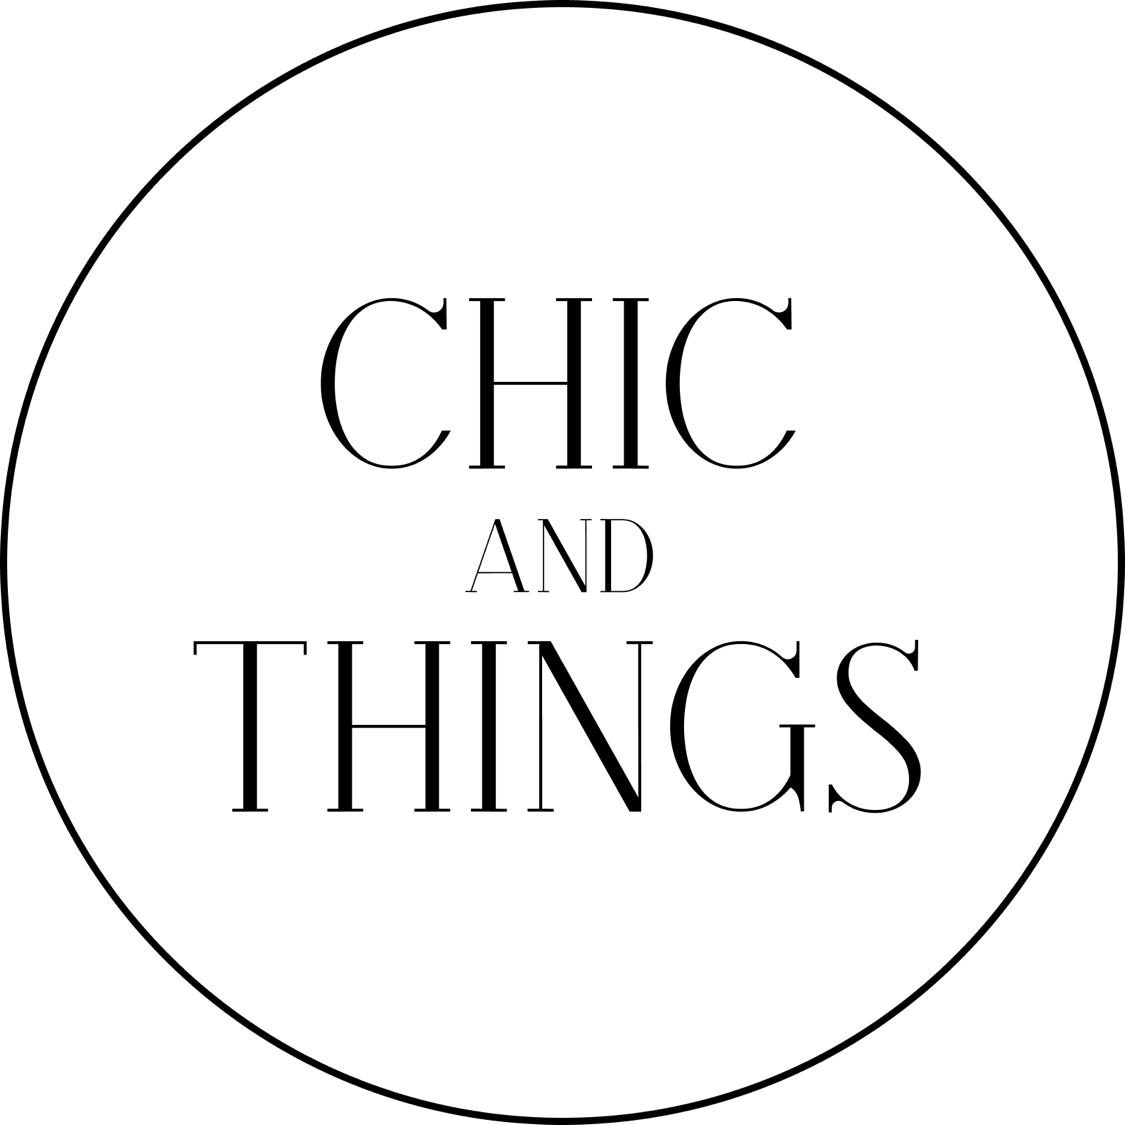 CHIC and THINGS